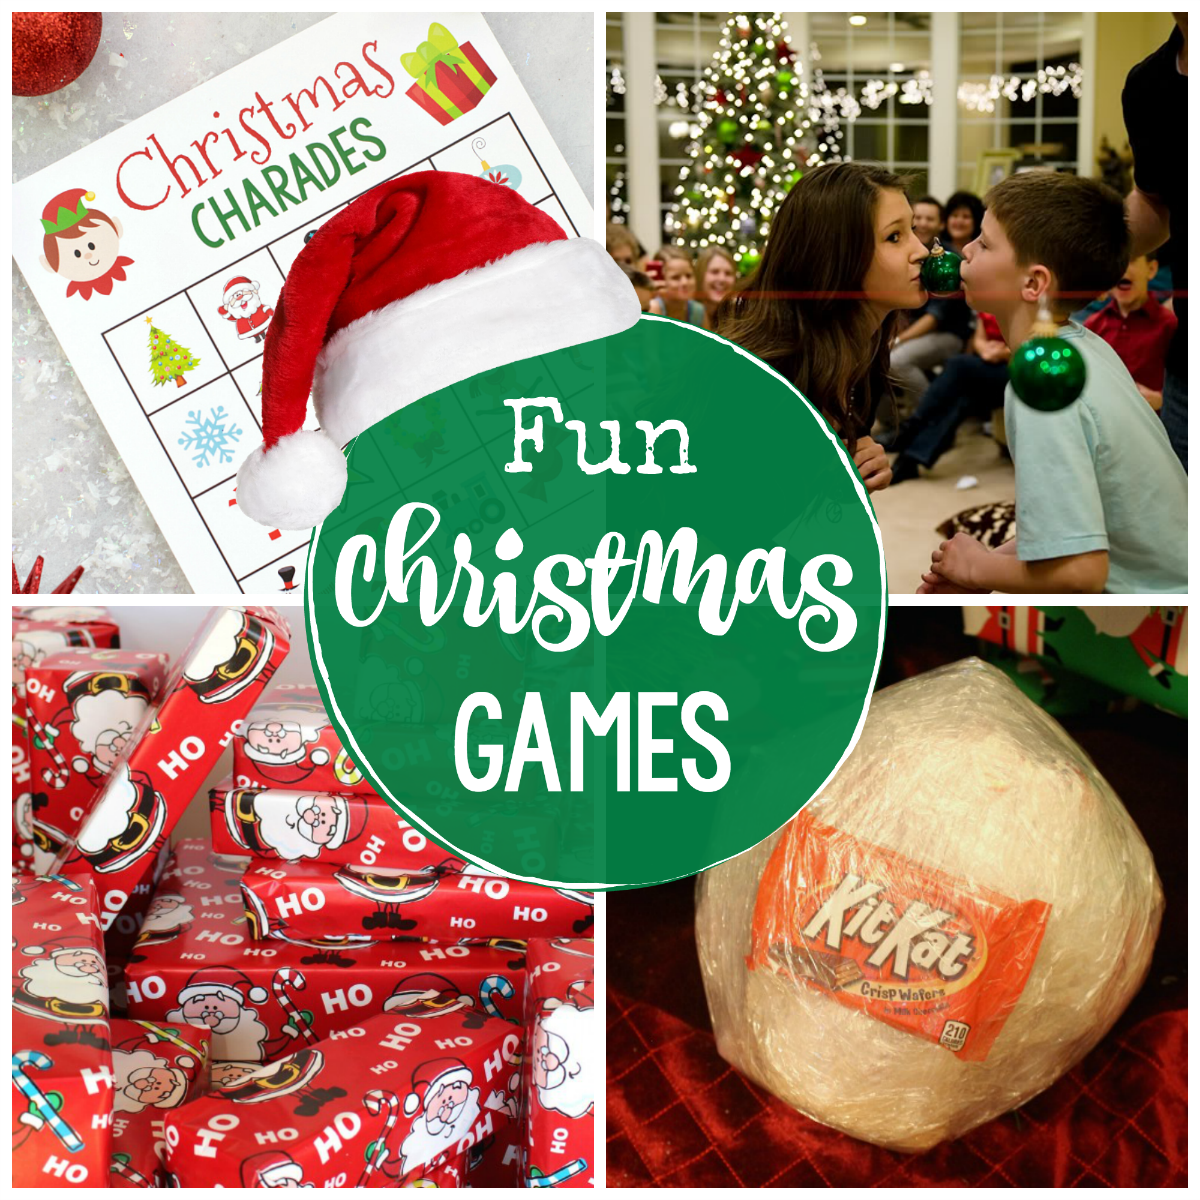 Fun Christmas Games to Play at Your Holiday Party